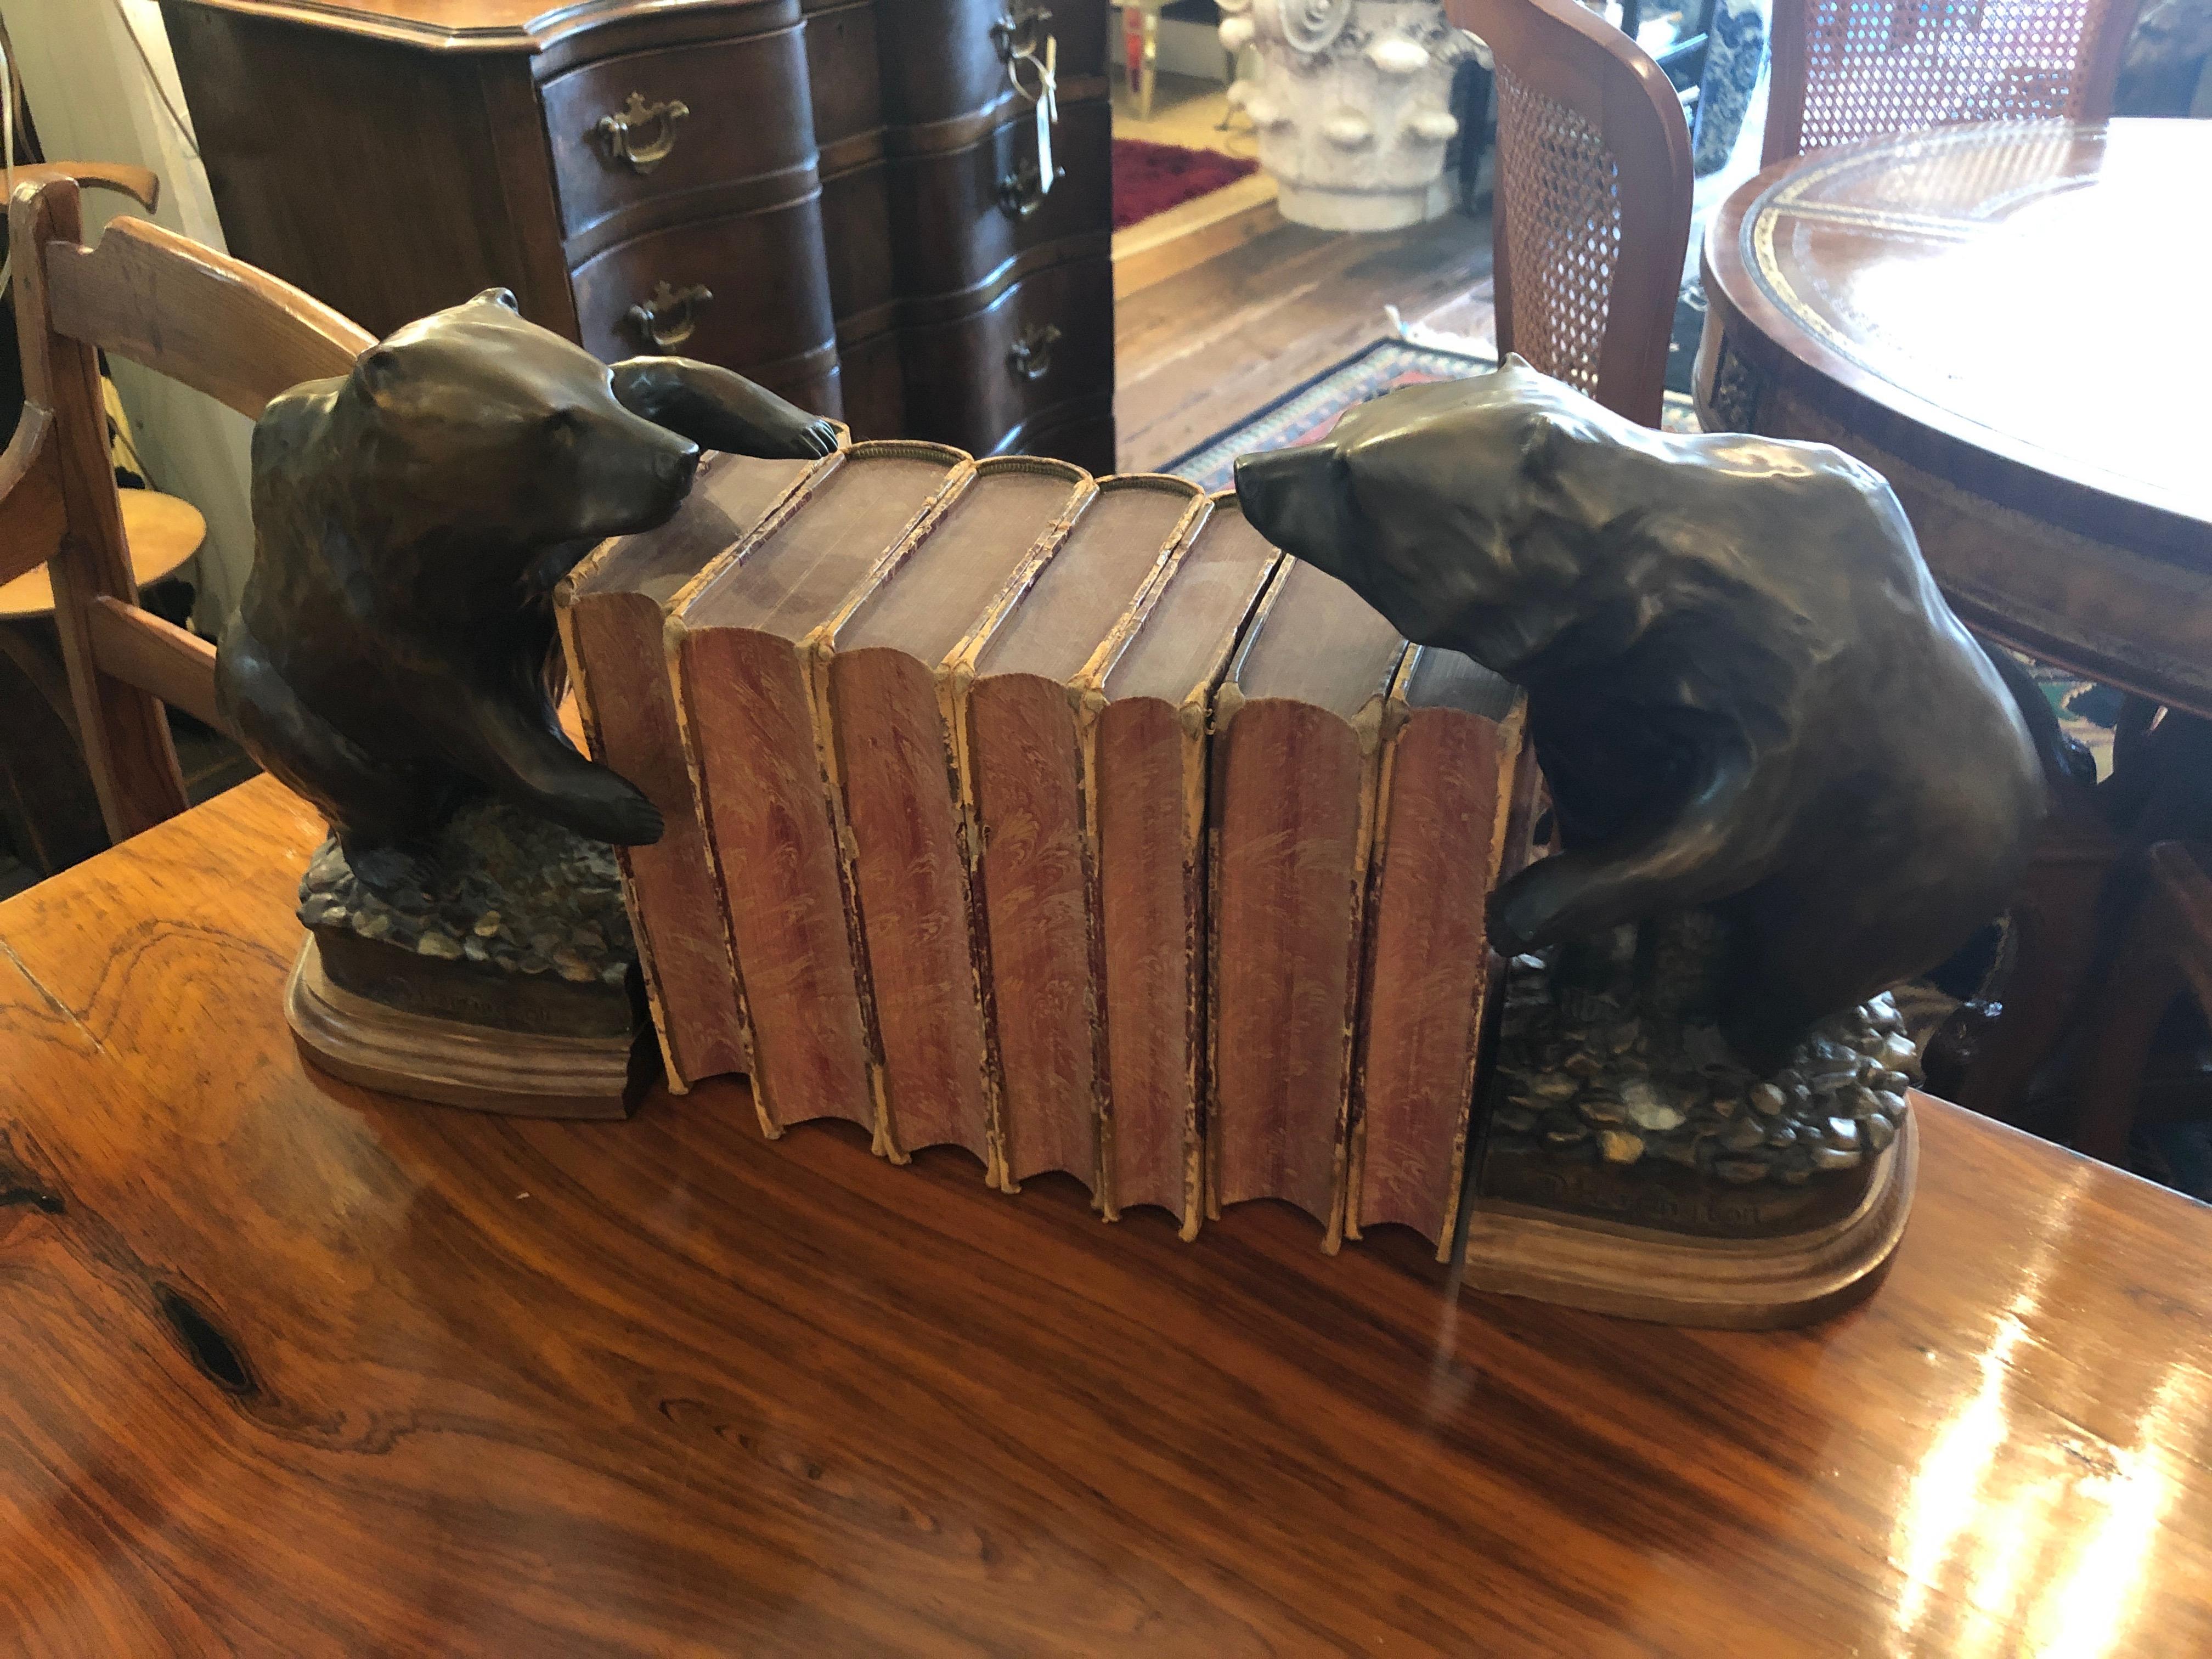 Handsome bronze bookends with wooden bases that are heavy masculine sculptures of bears in unique poses.